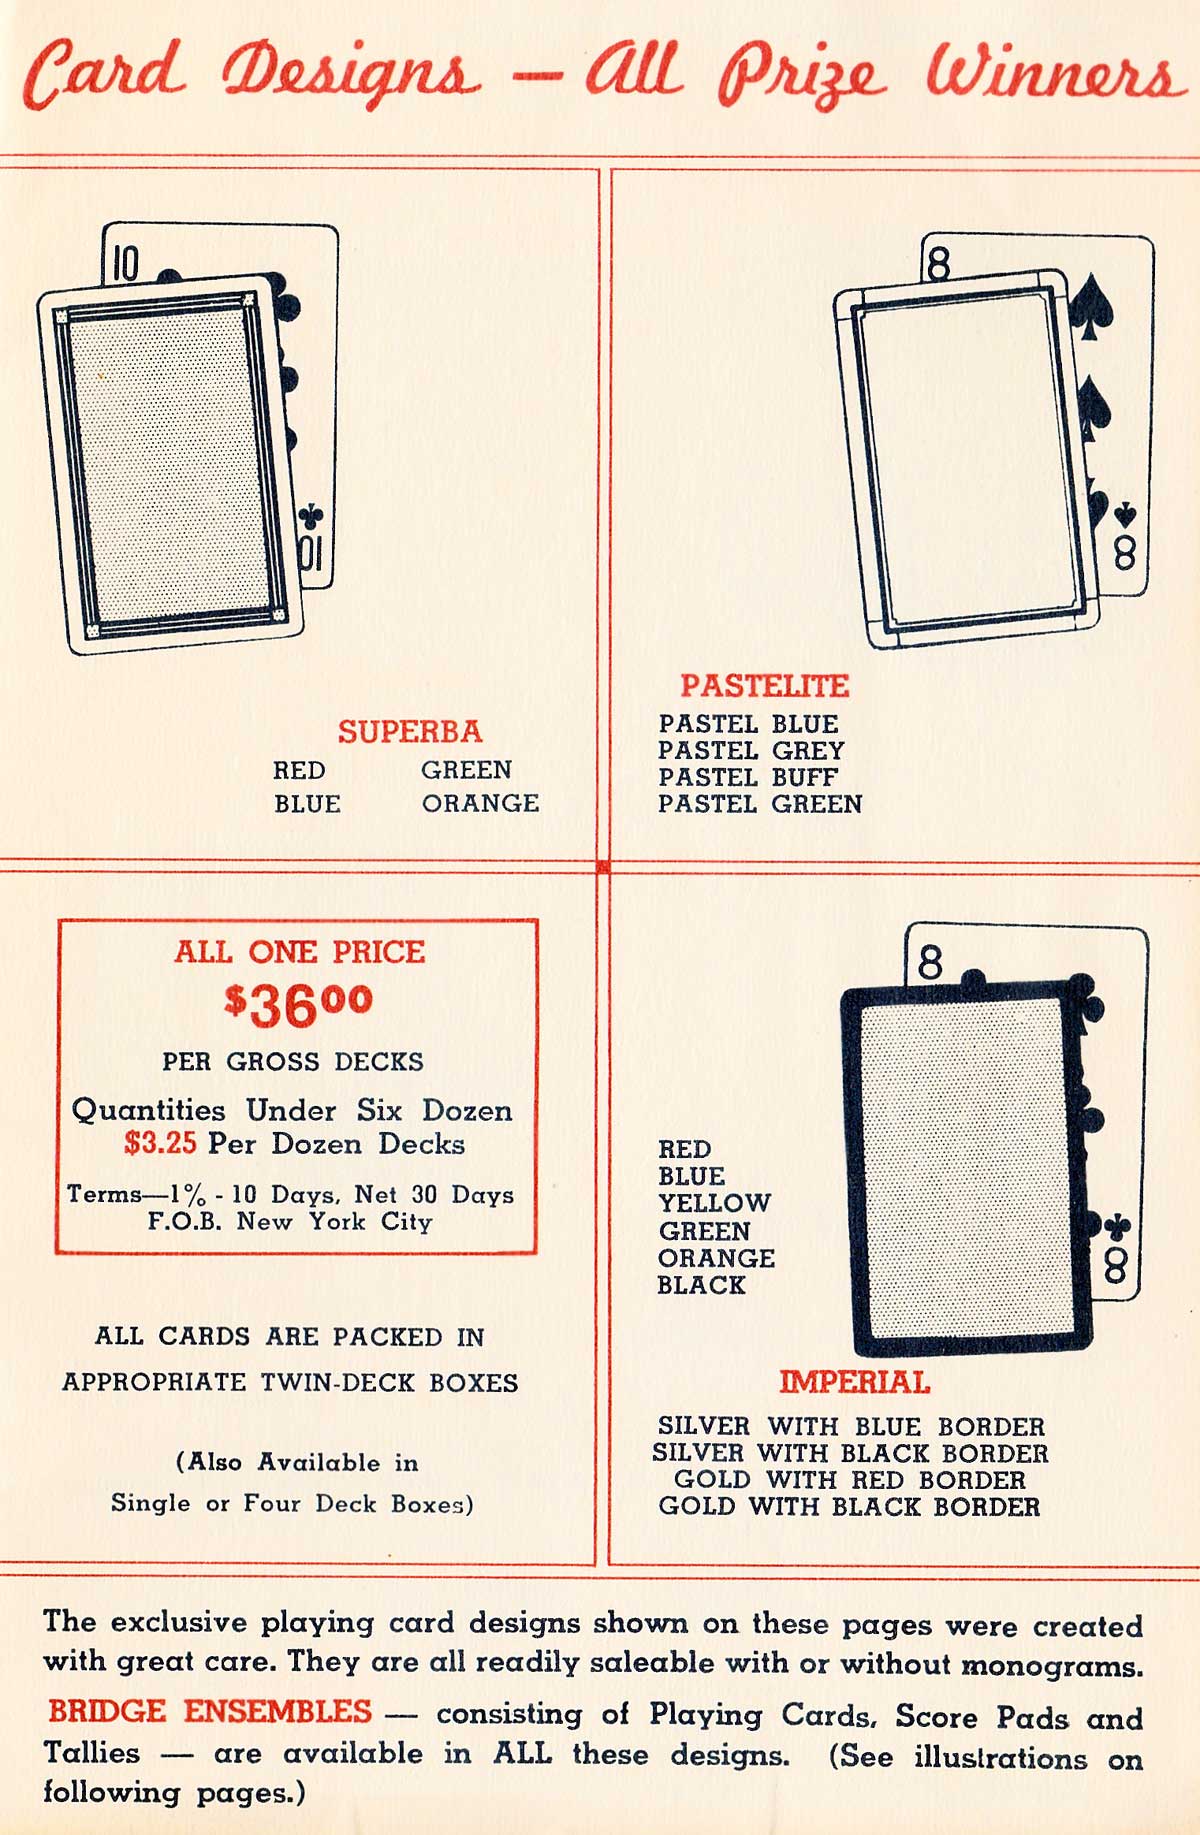 Trade catalogue by Atlantic Line Playing Card Co., Inc., c.1930s